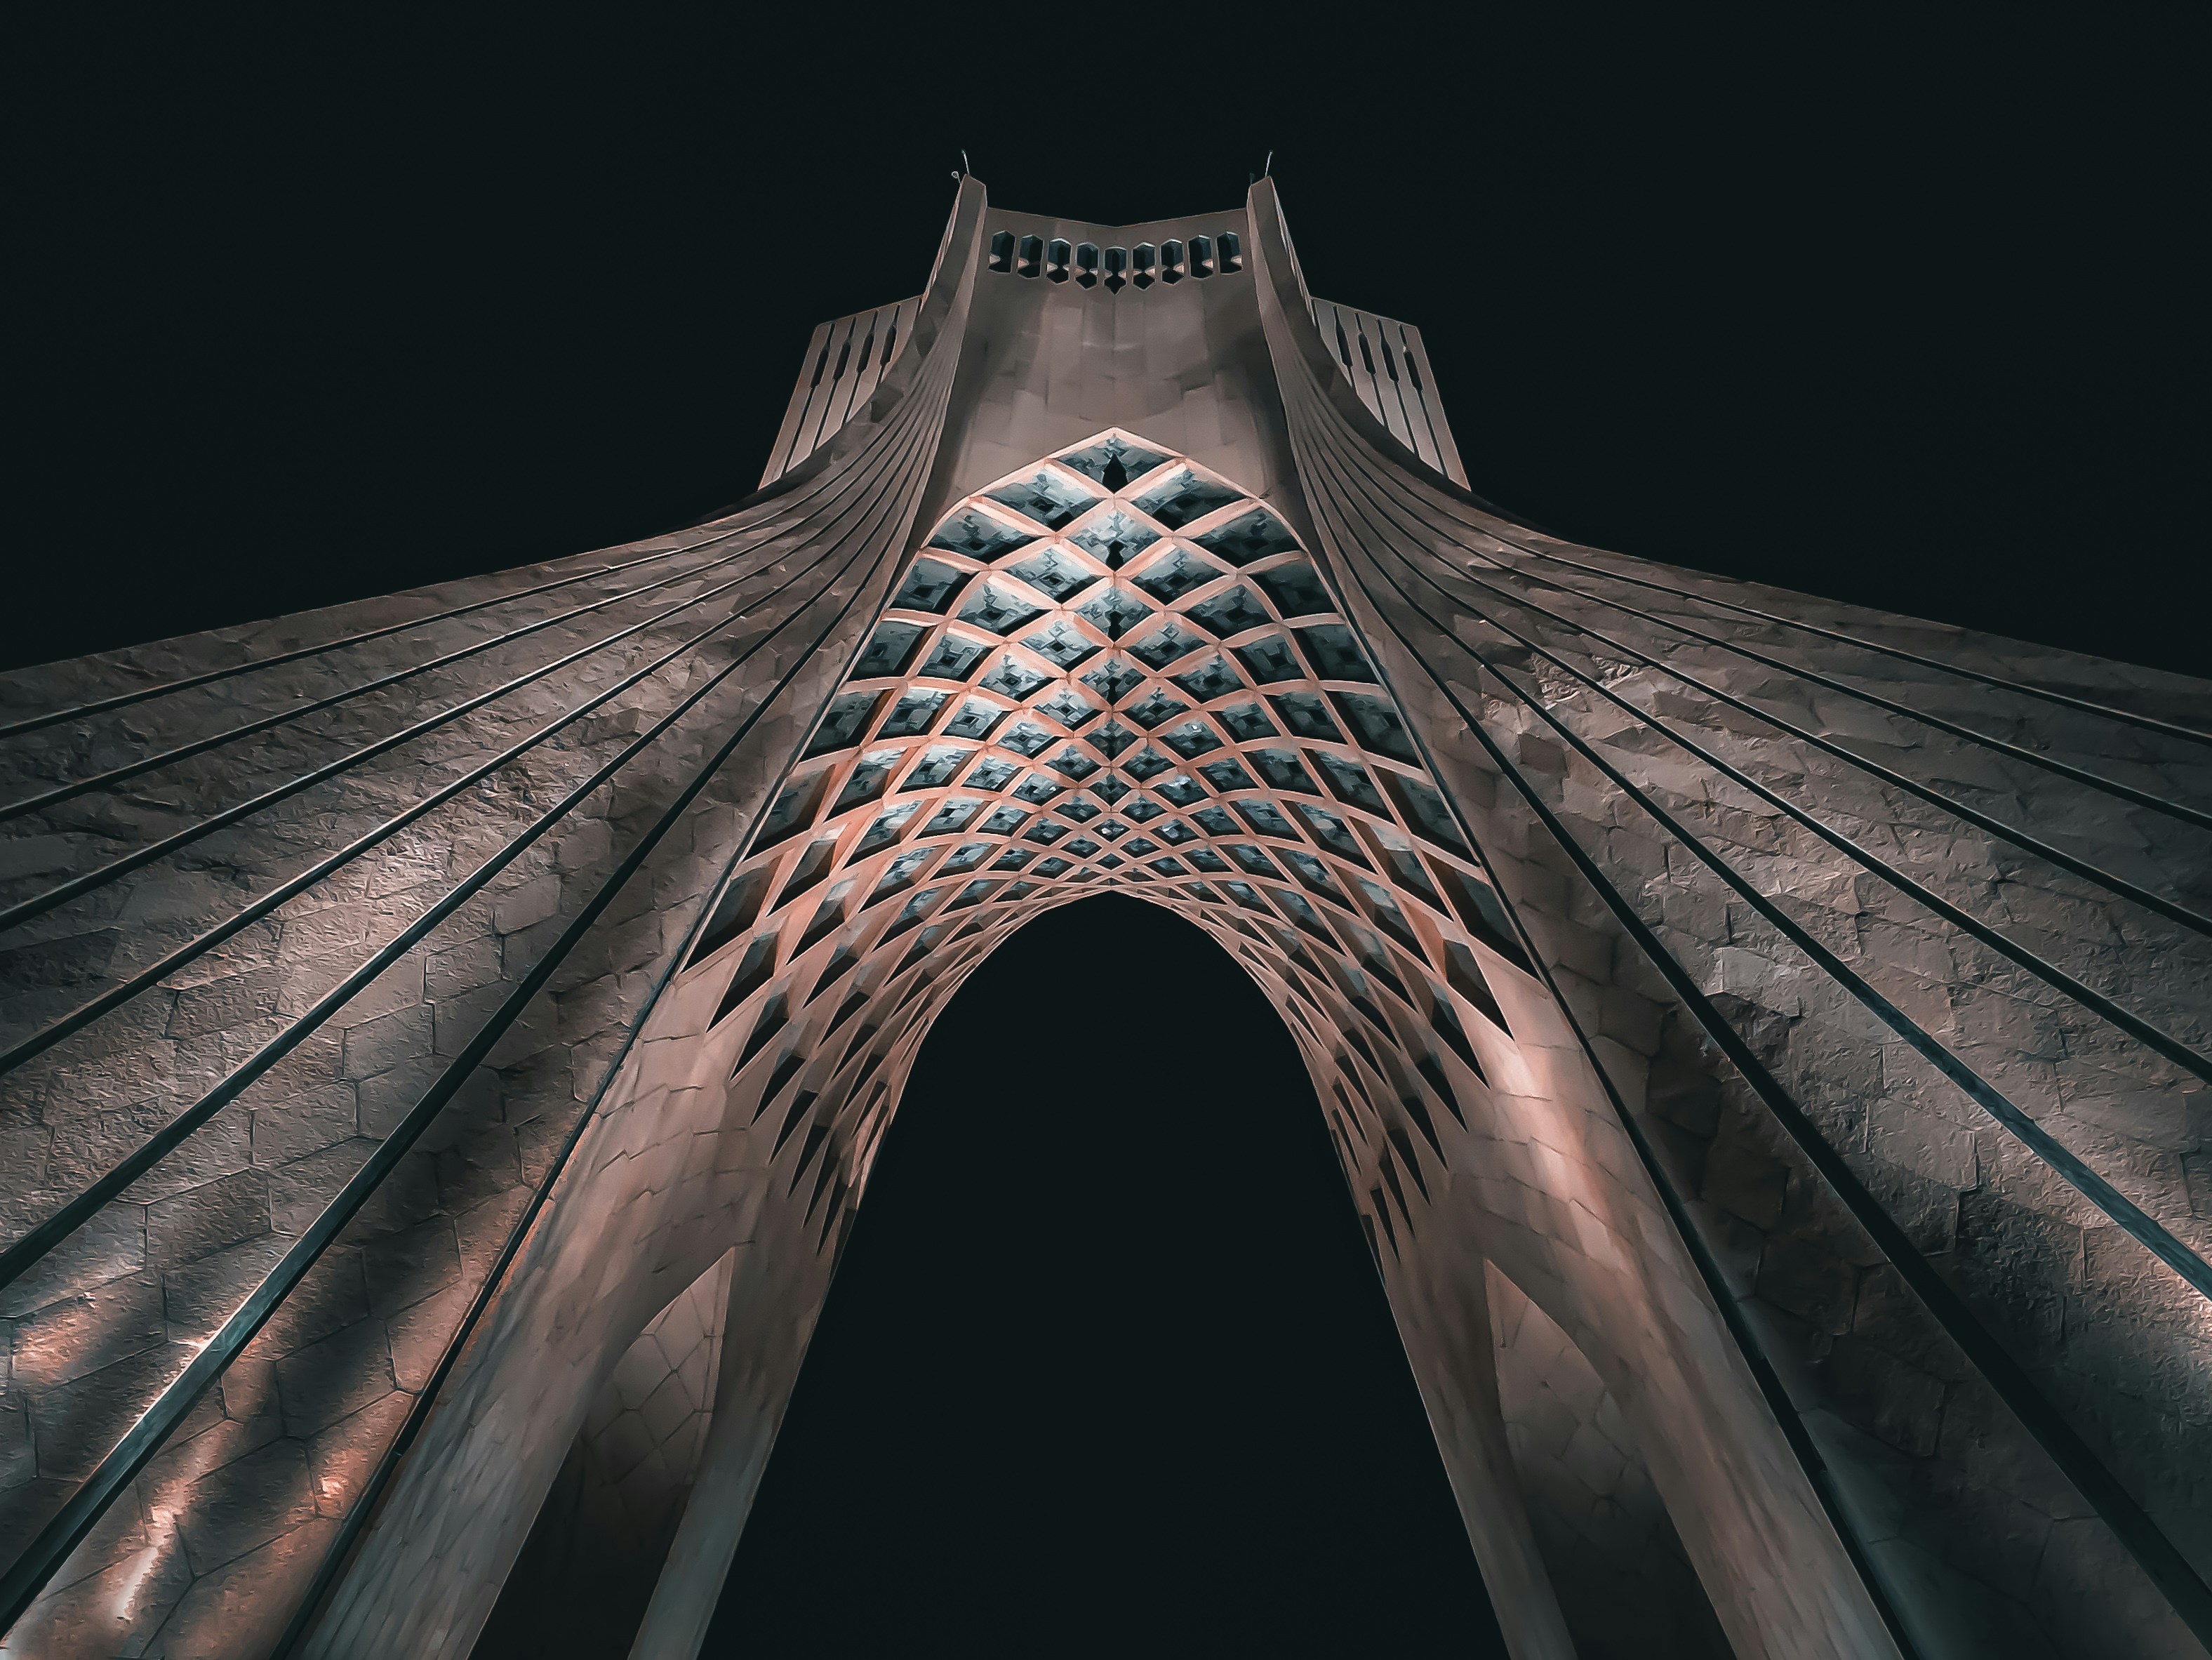 Azadi tower in the night At tehran province